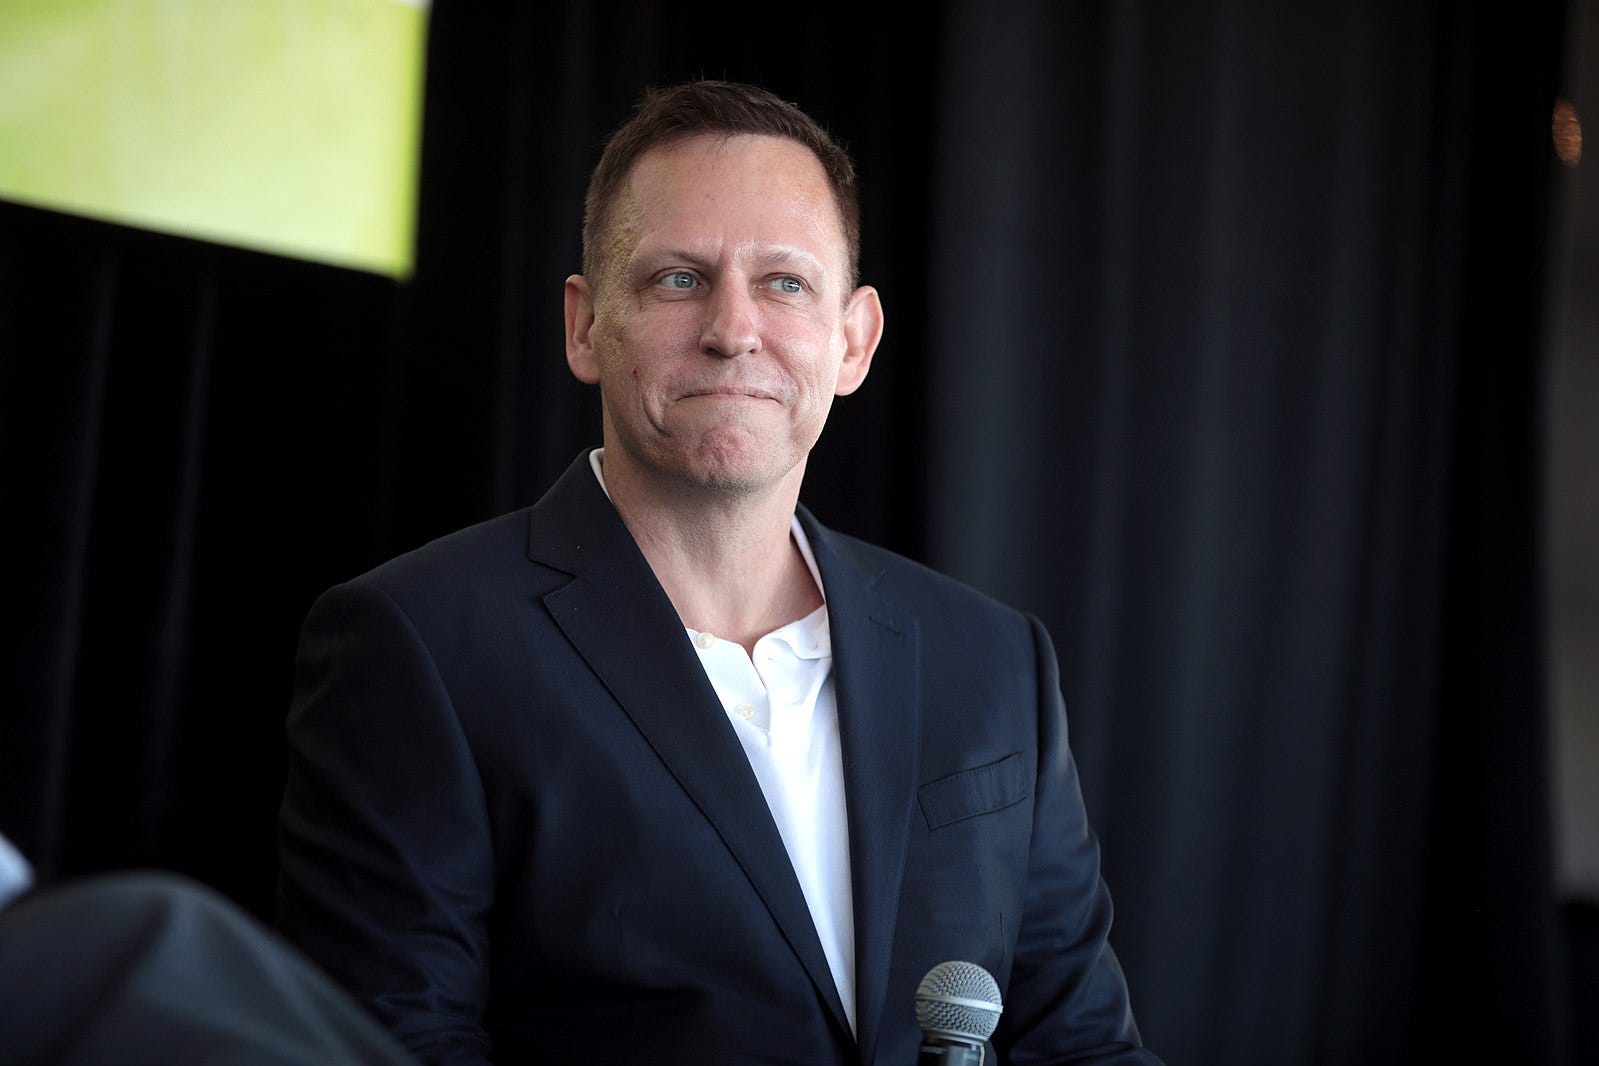 Elon Musk Joined By Fellow 'PayPal Mafia' Member And Key Trump Supporter Peter Thiel In Praising Desantis: 'Best Of The Governors'